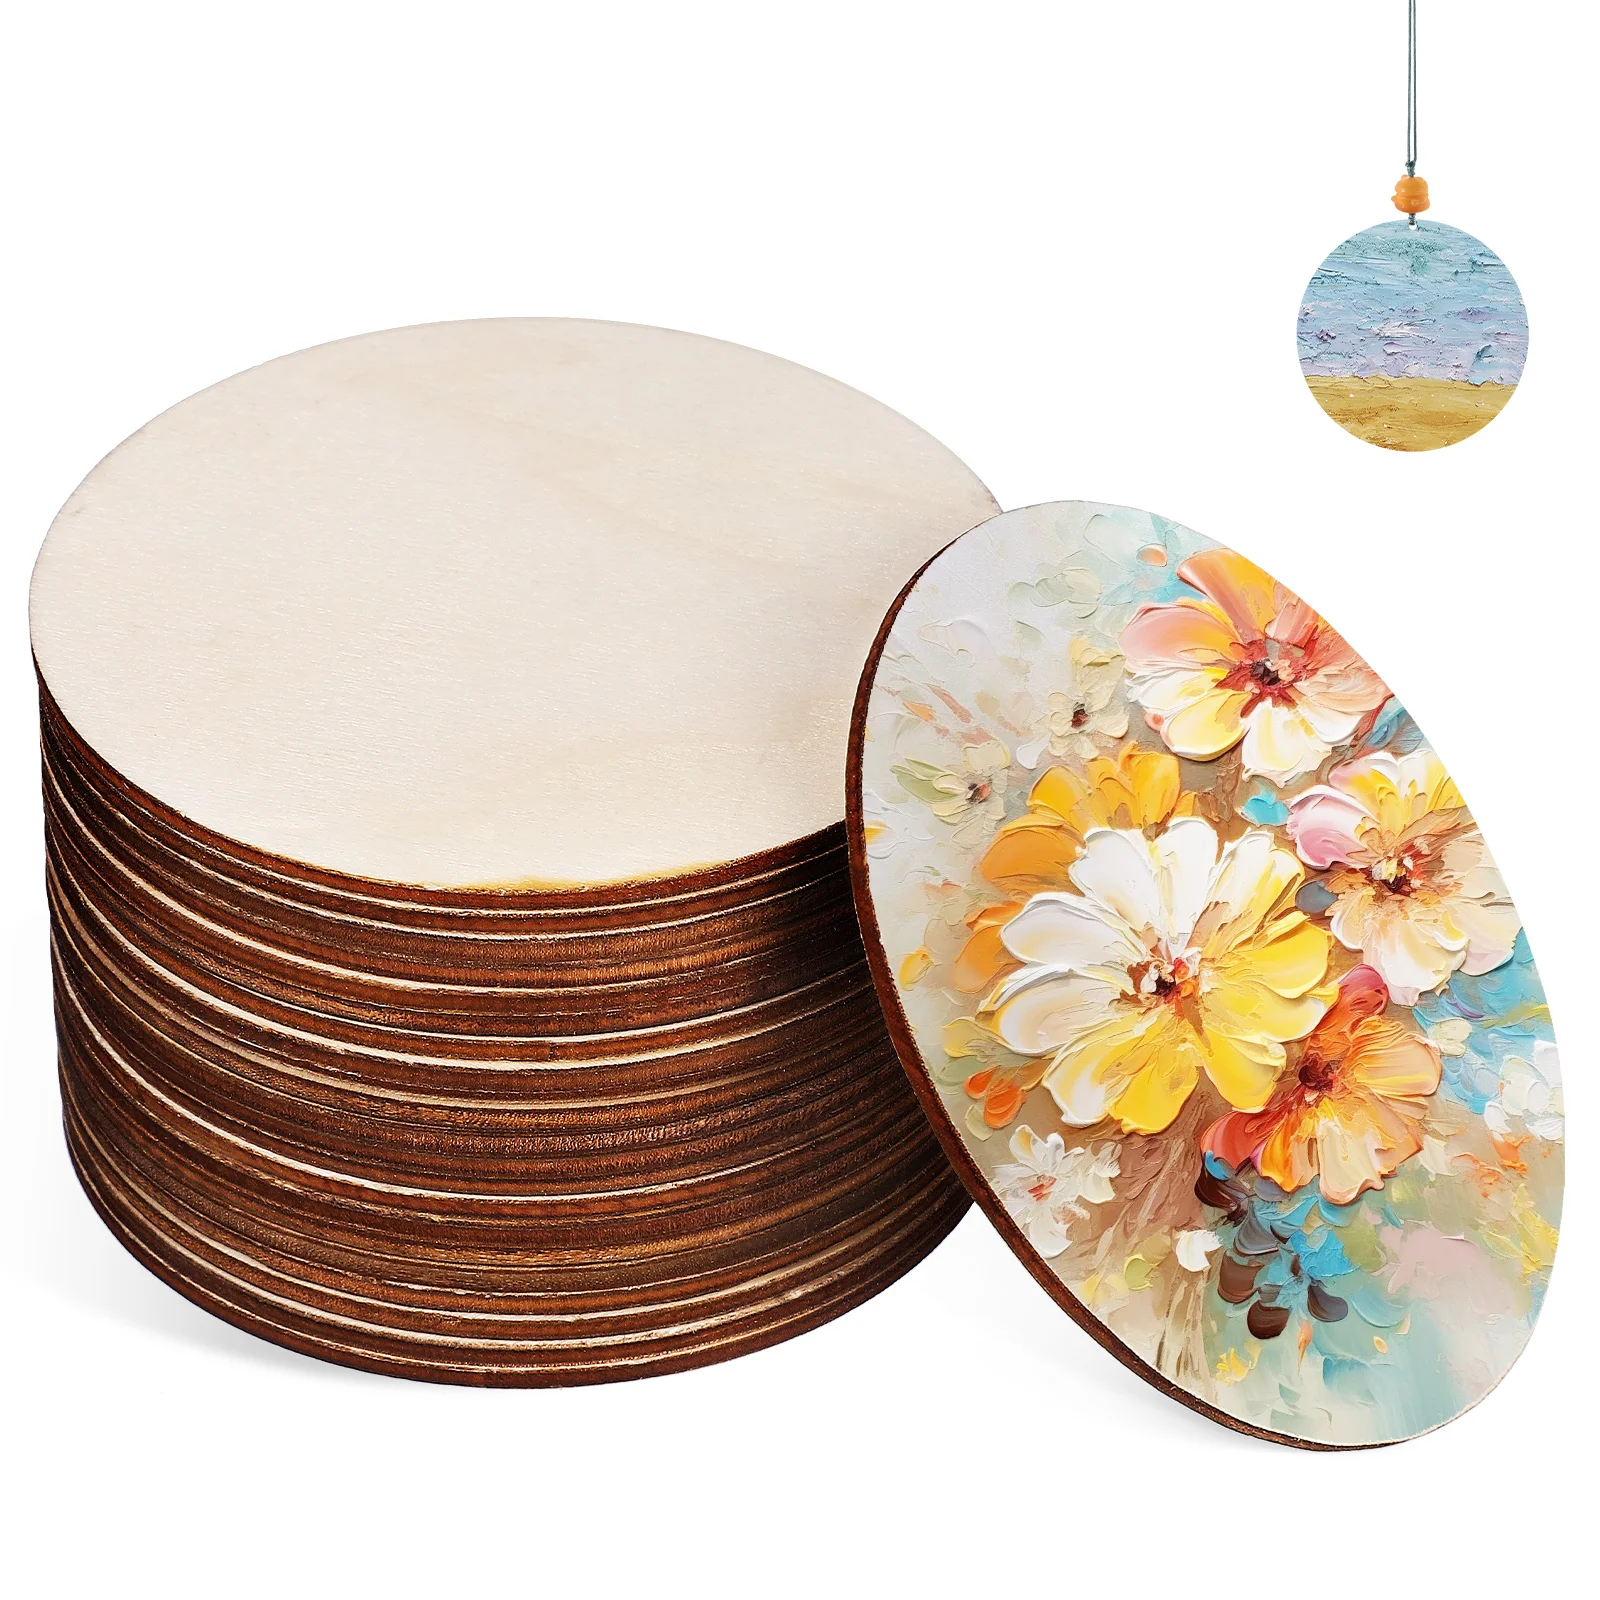 

20 Pcs Handmade Materials Round Wood Ornament Rounds For Crafts Wooden Circle Cutouts For Crafting Ornaments Coasters Poplar